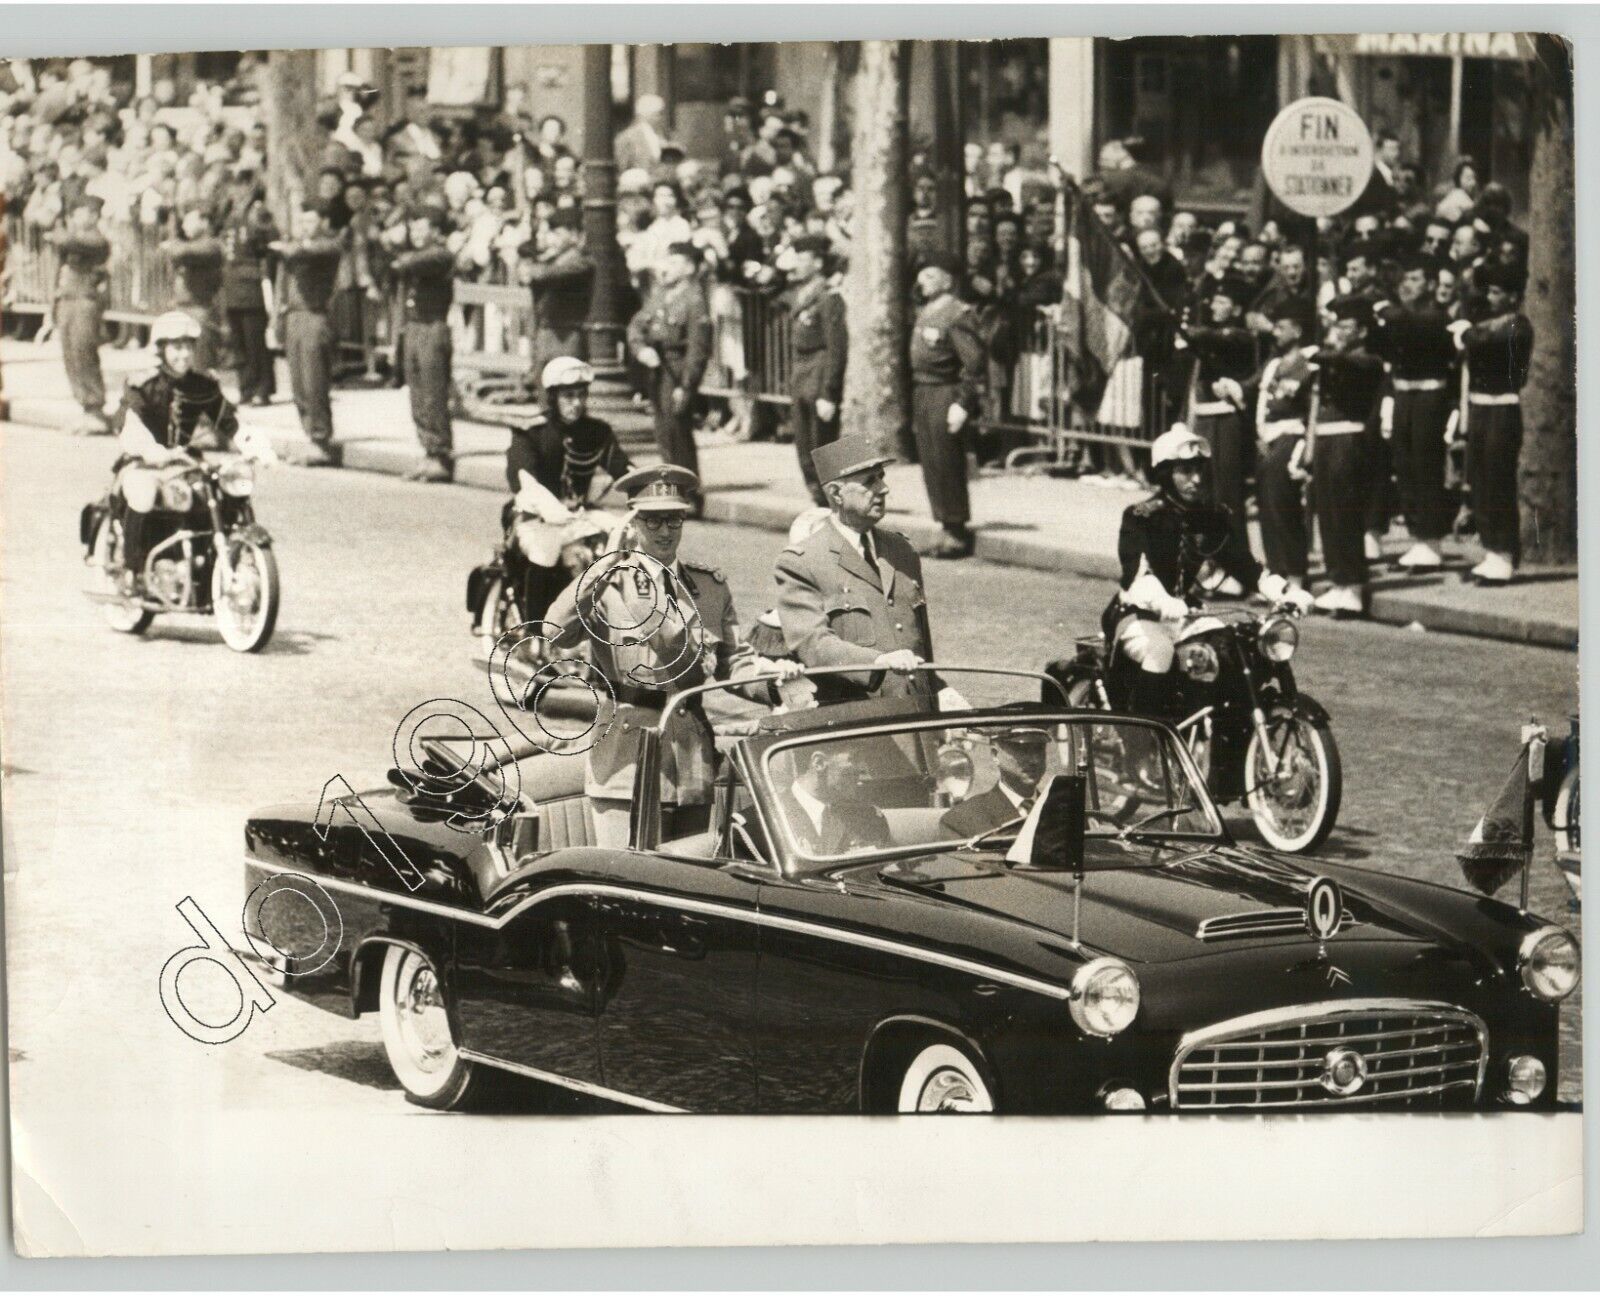 King Baudoin & De Gaulle Waving to on Crowd Champs Elysees 1961 PRESS PHOTO